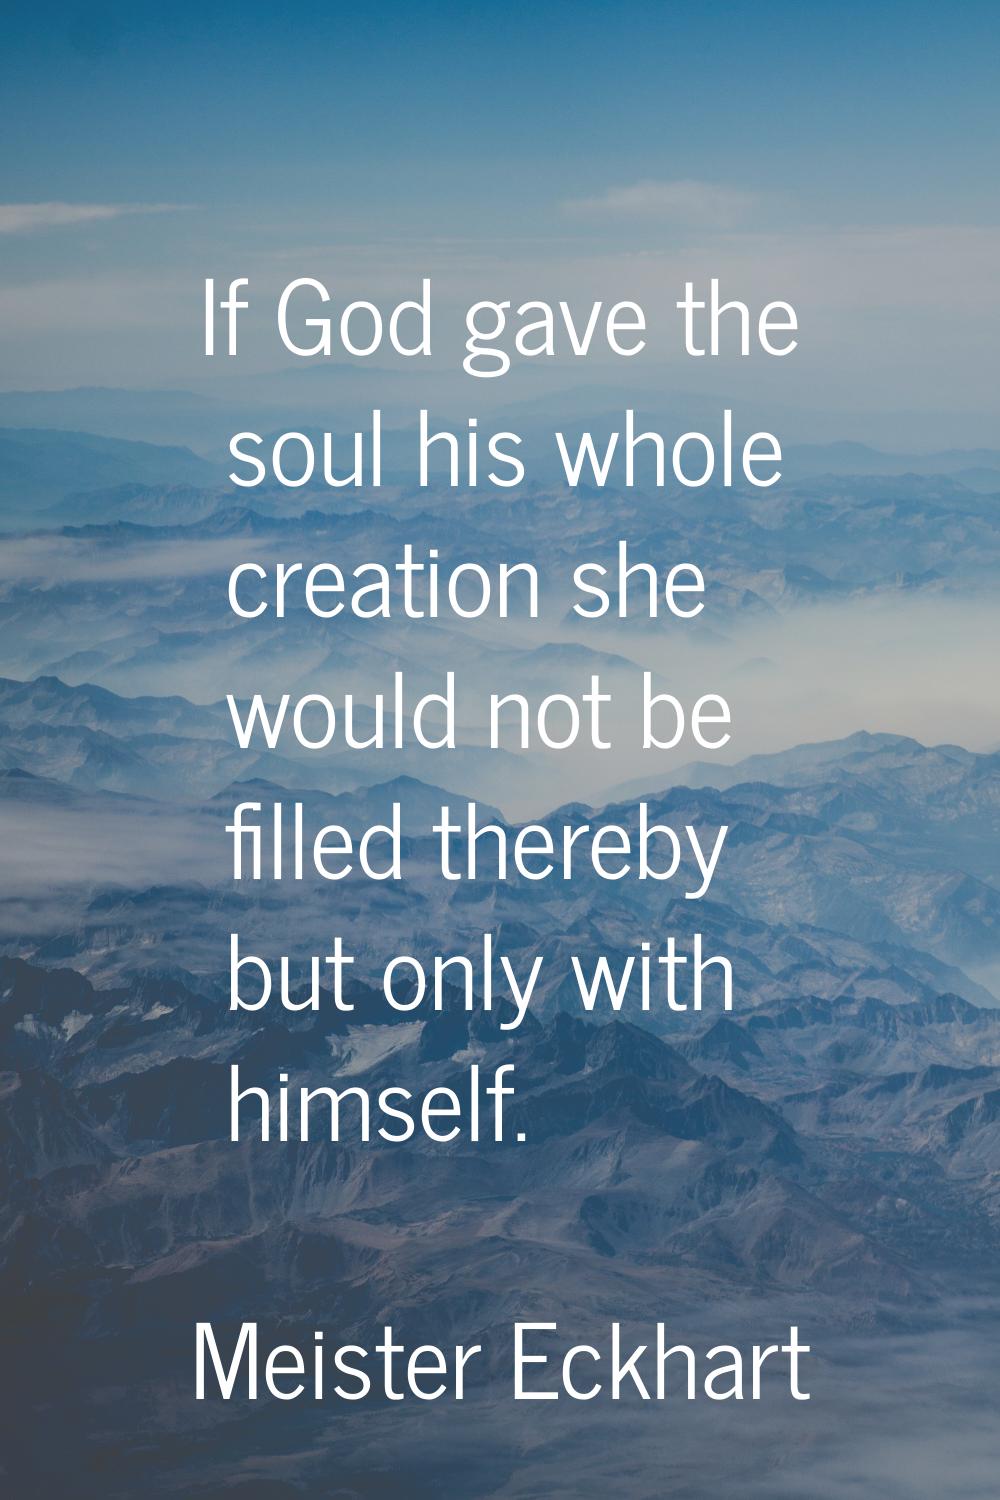 If God gave the soul his whole creation she would not be filled thereby but only with himself.